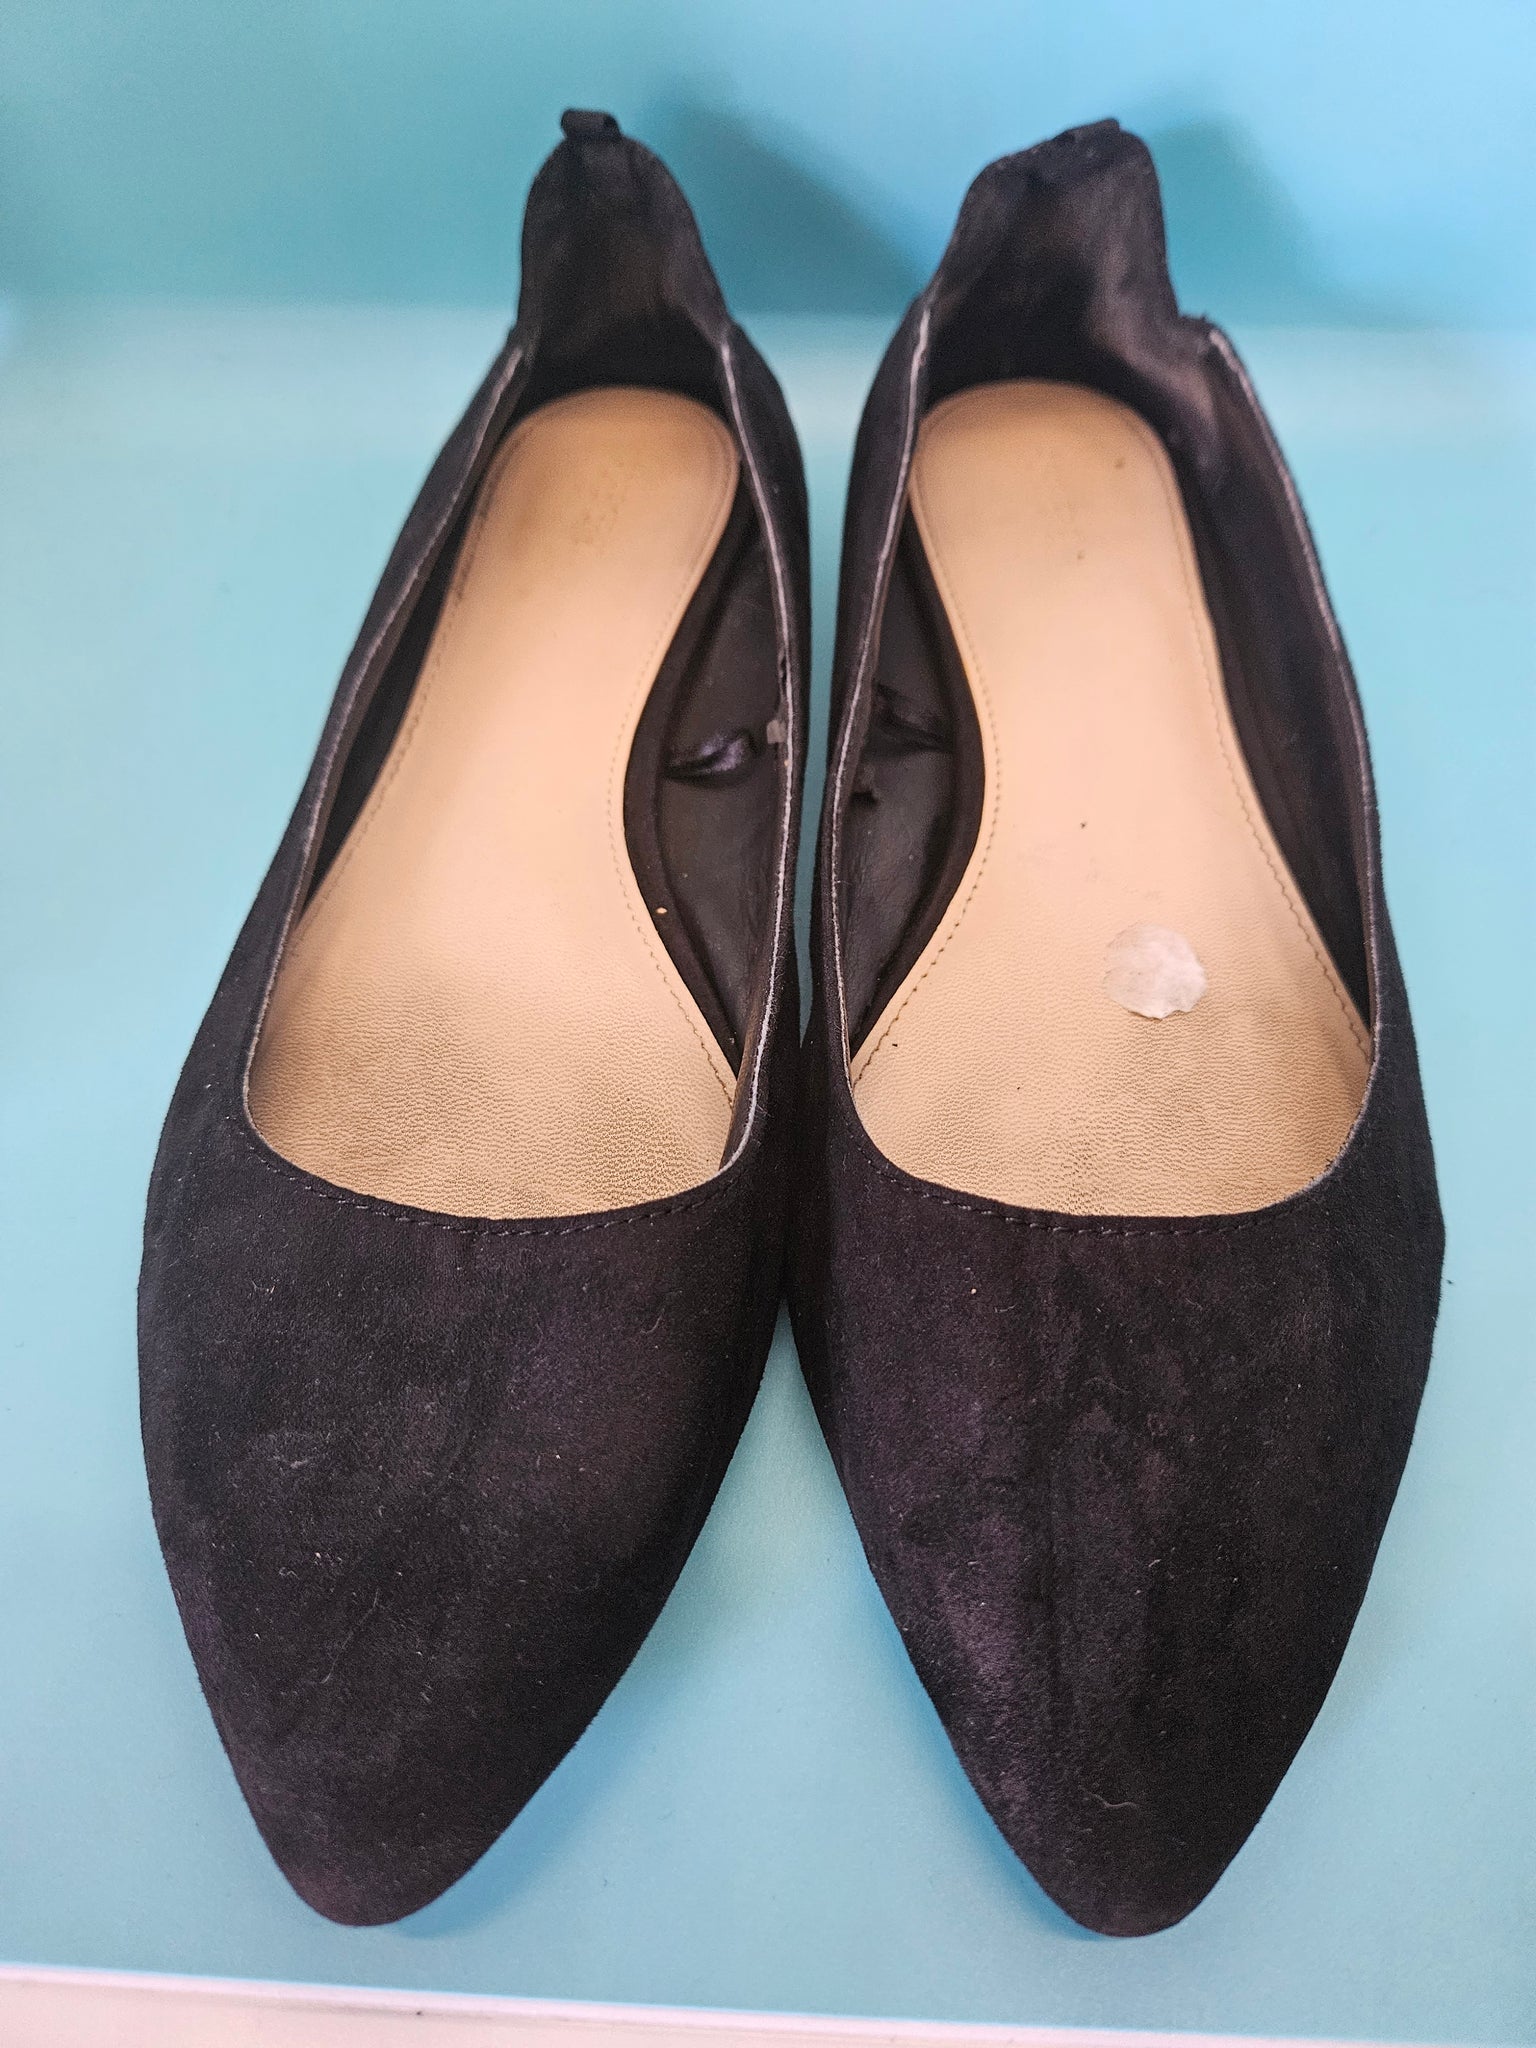 Size 9 FOREVER 21 Black Suede Pointed Toe Flat Shoes